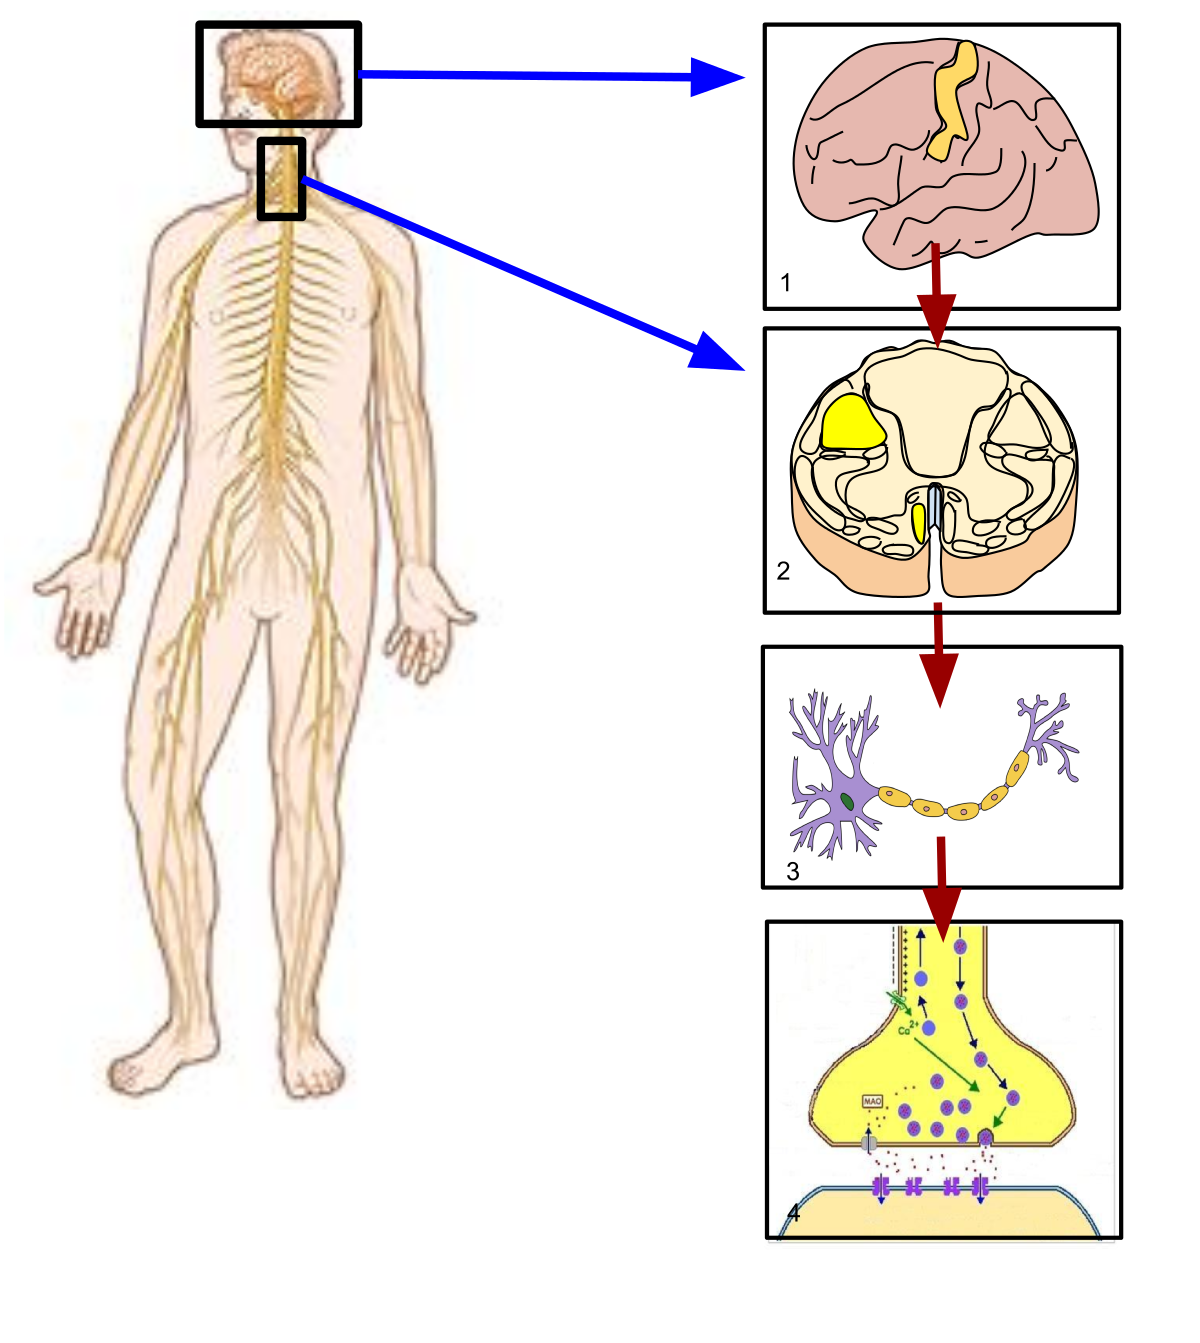 example of somatic nervous system